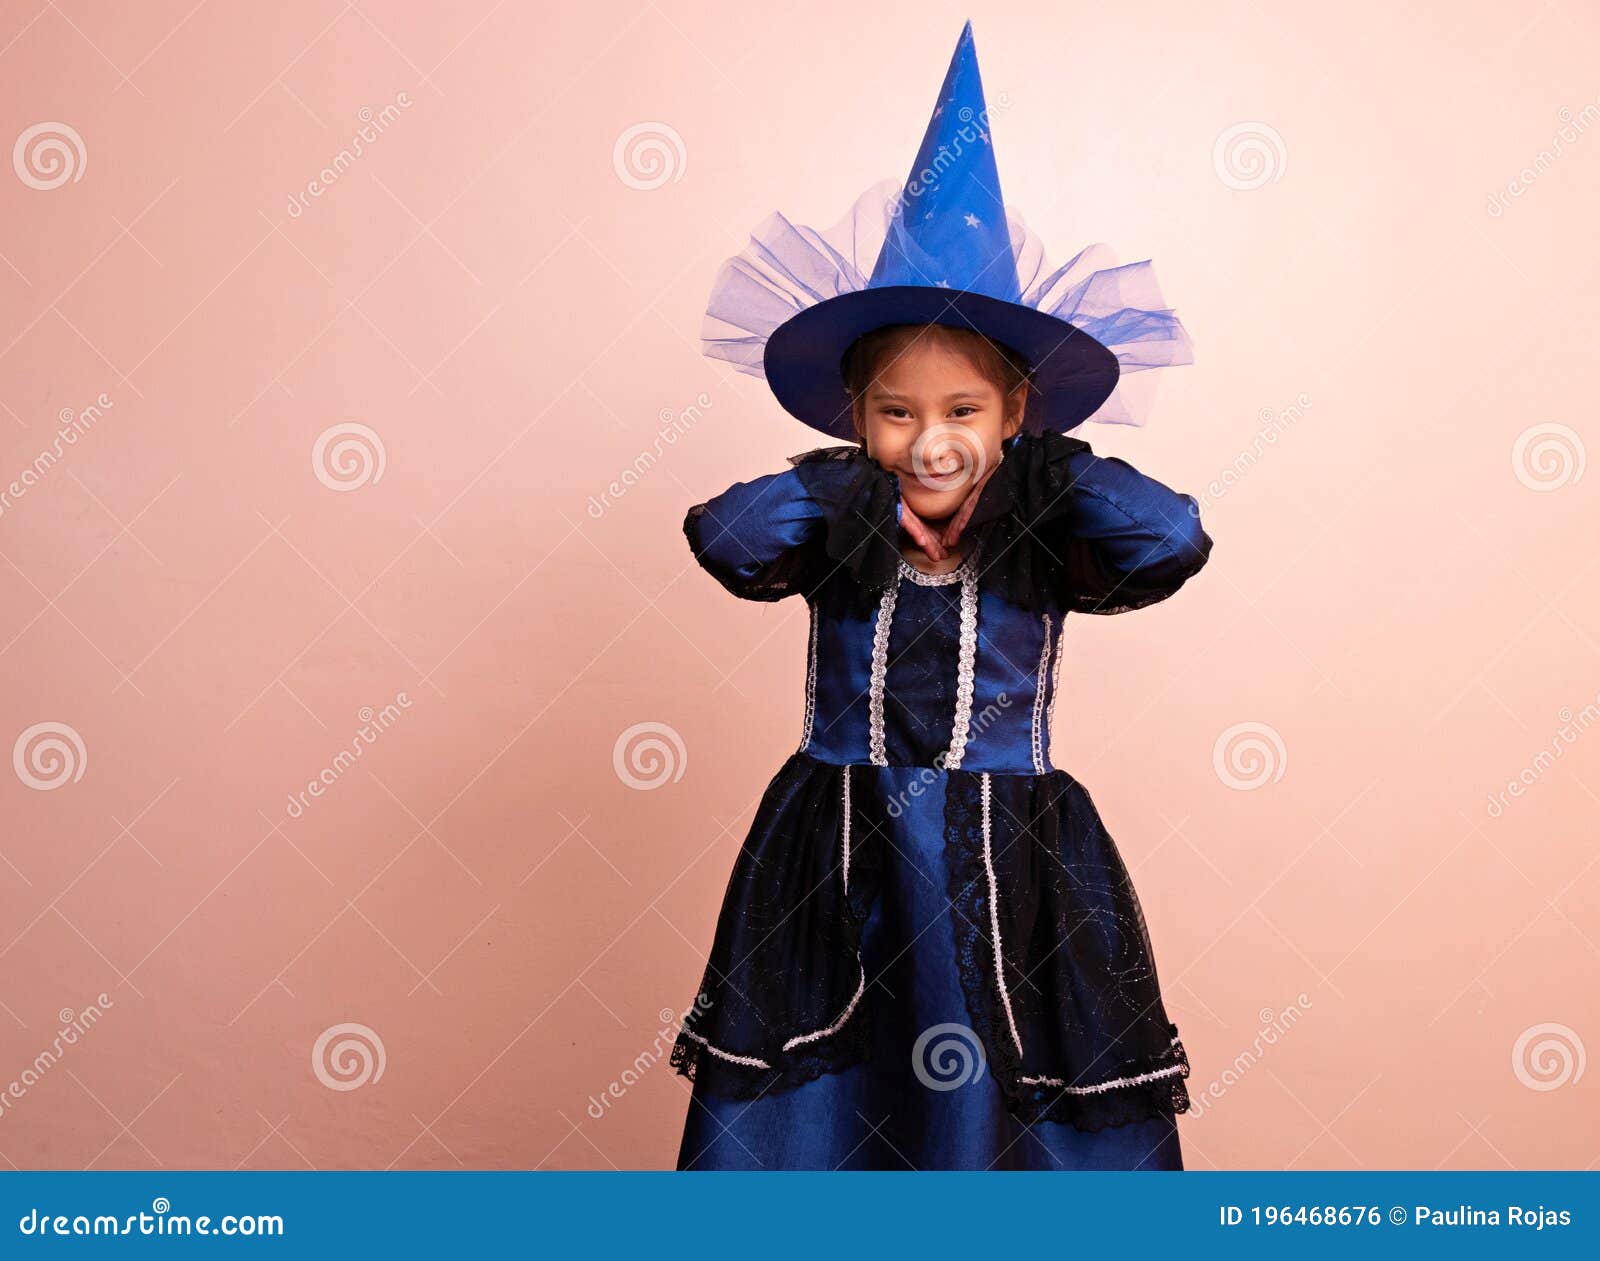 Blue Witch Costume - wide 5